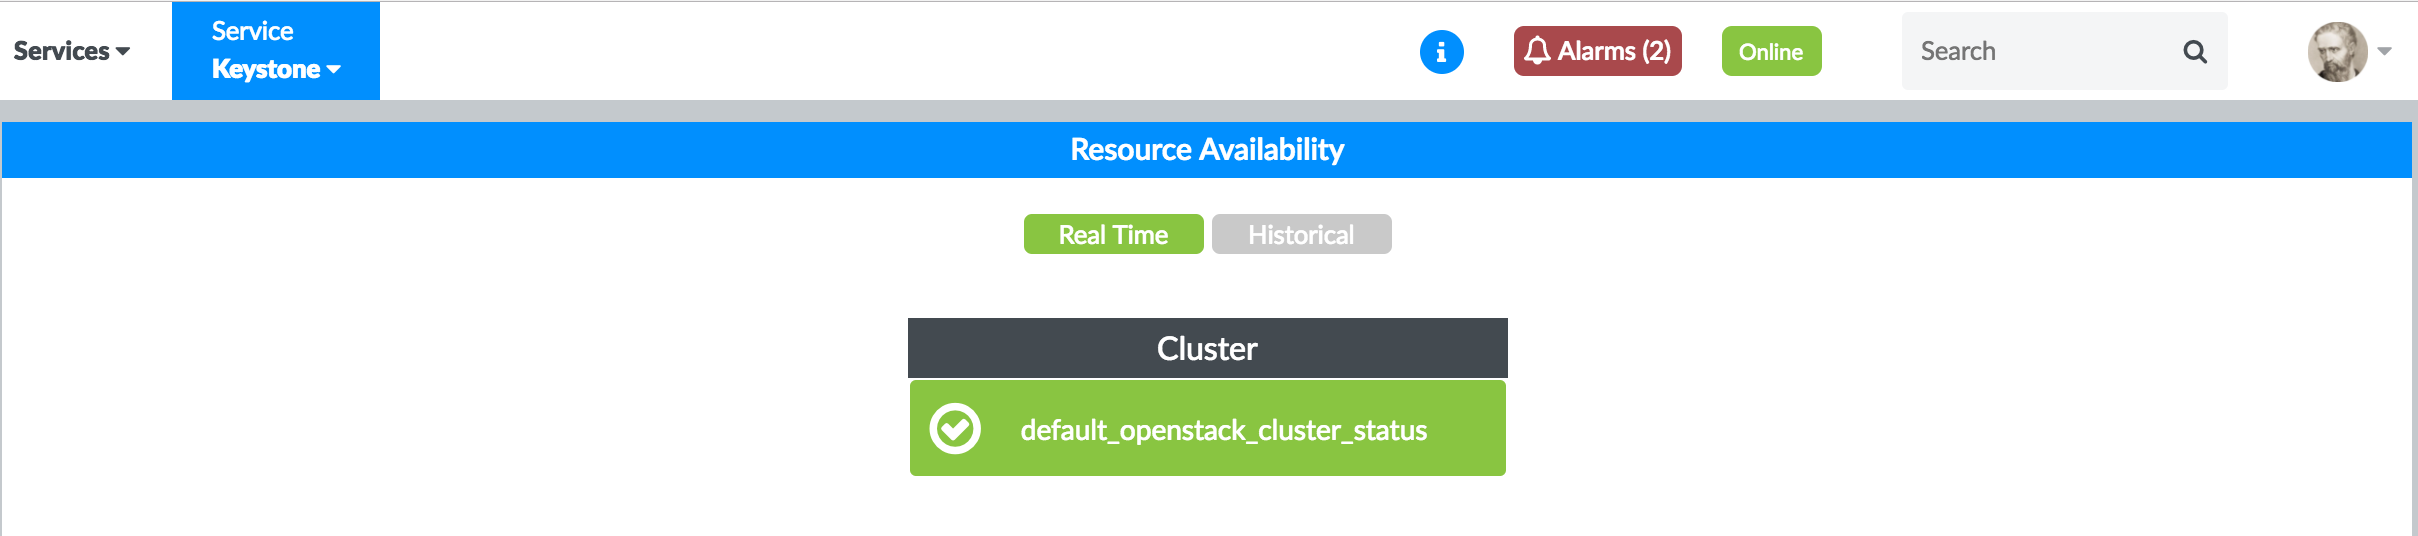 OpenStack Keystone
Nodes Real-Time Availability